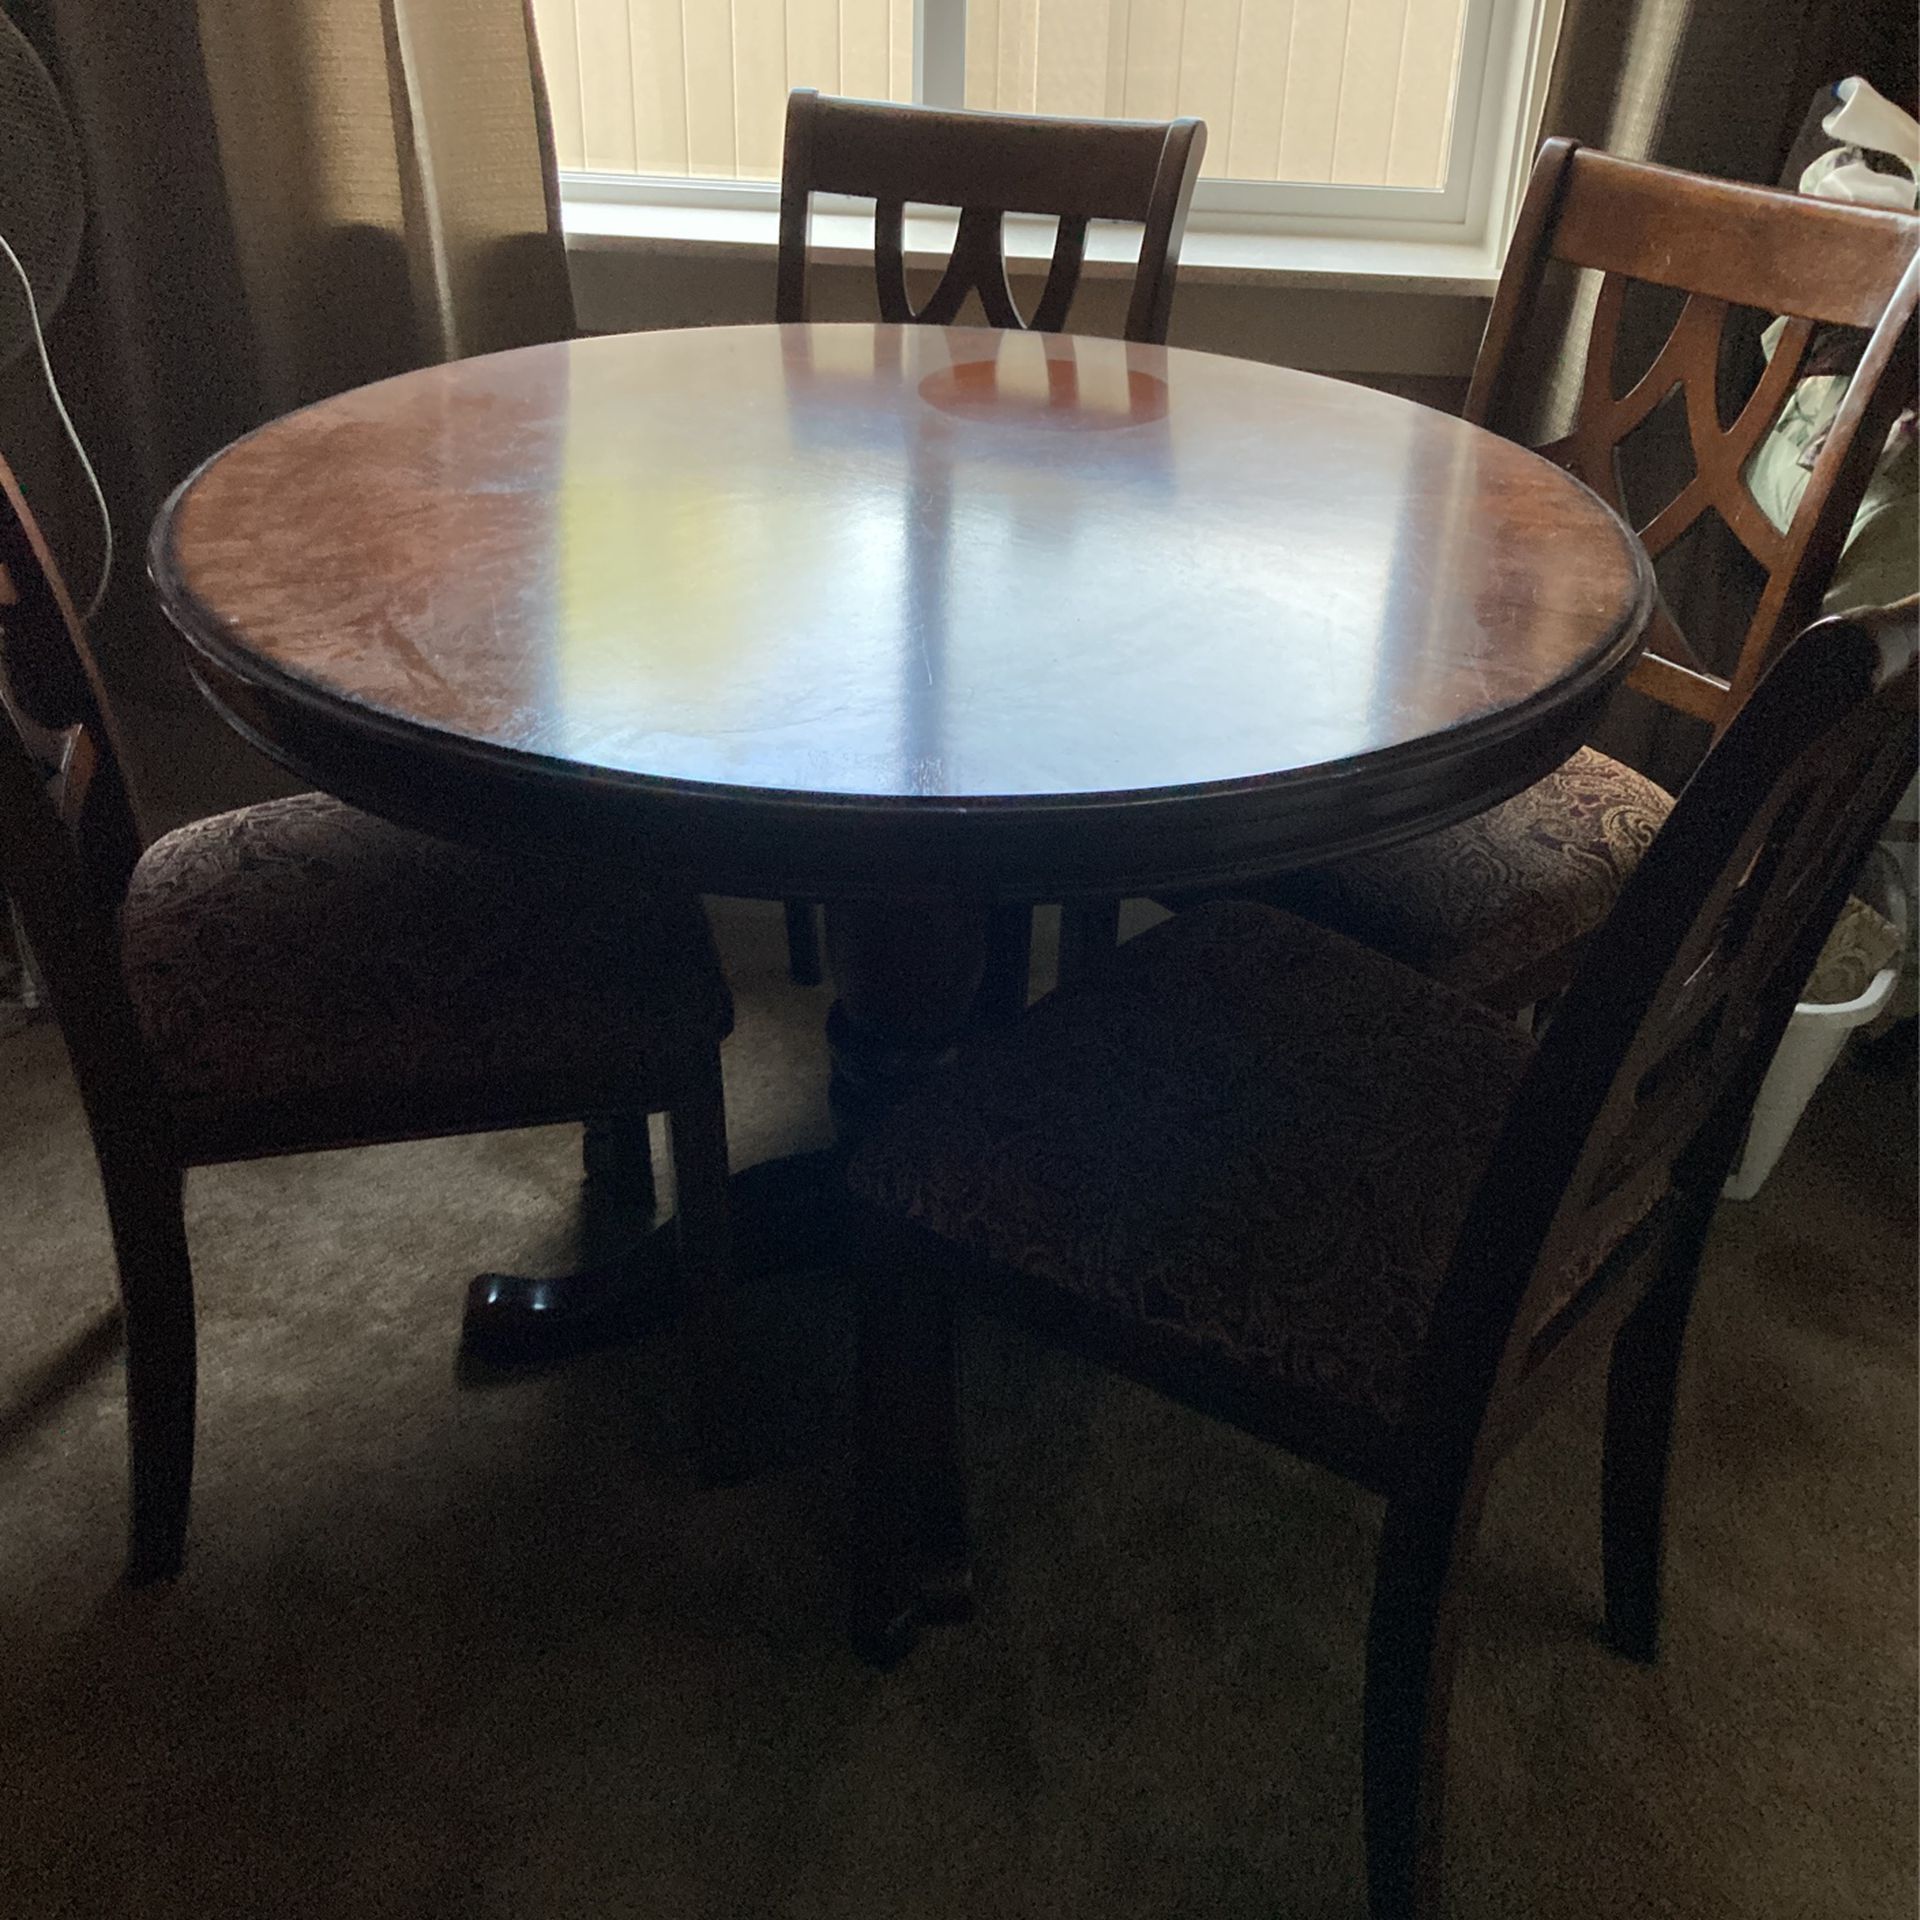 Ashley Table 4 Chairs Reduced Price